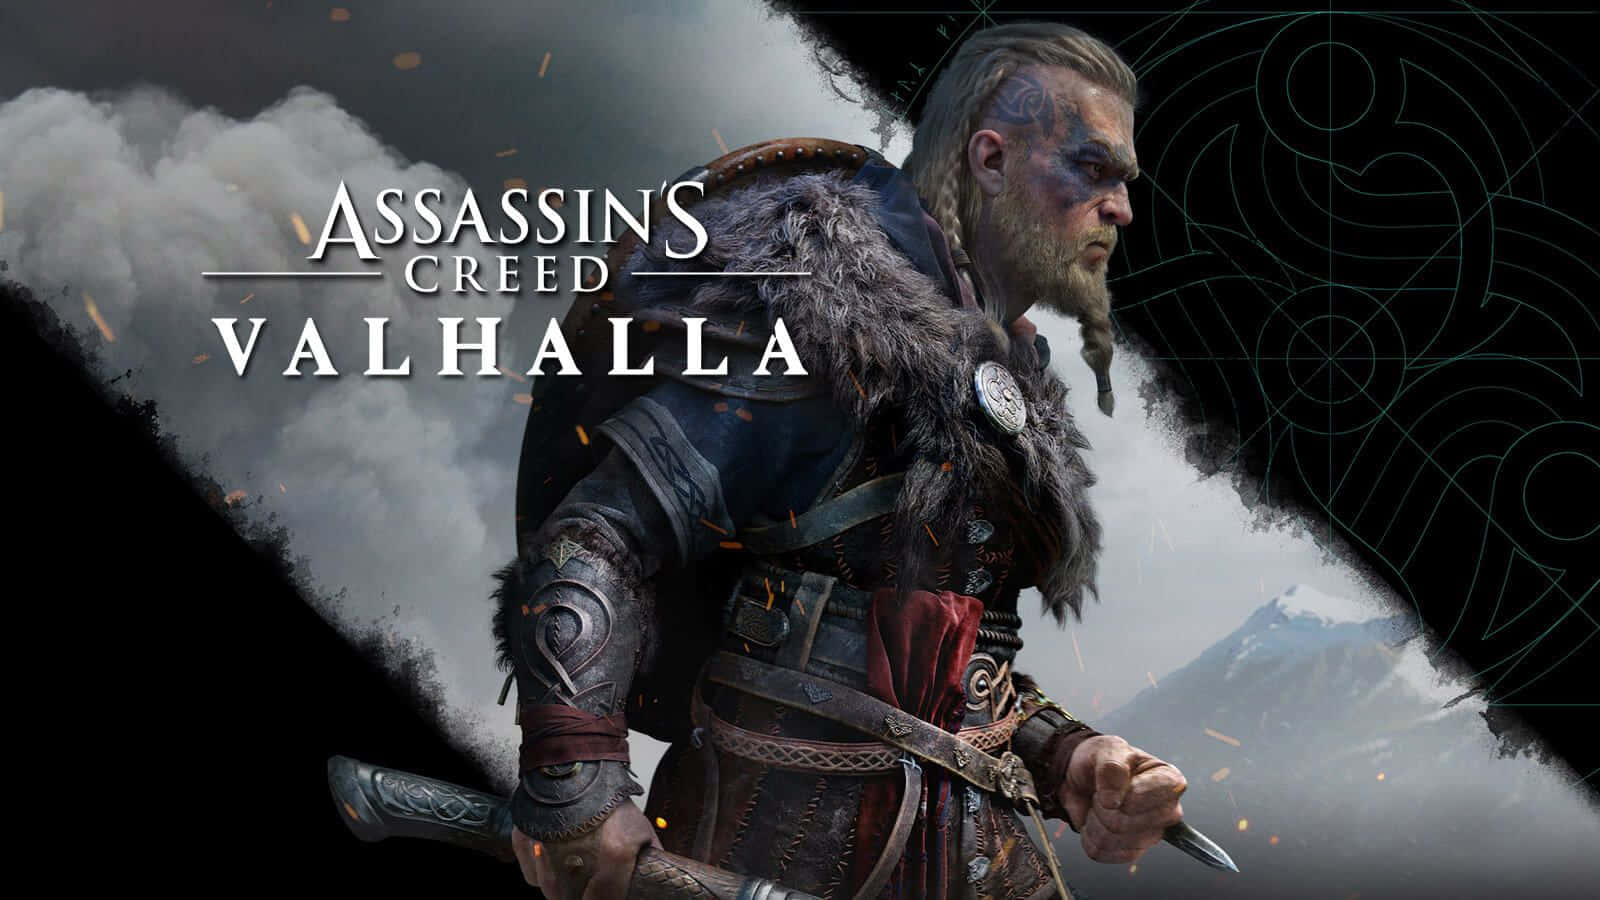 "Embrace your fate and become Eivor in Assassin’s Creed Valhalla."